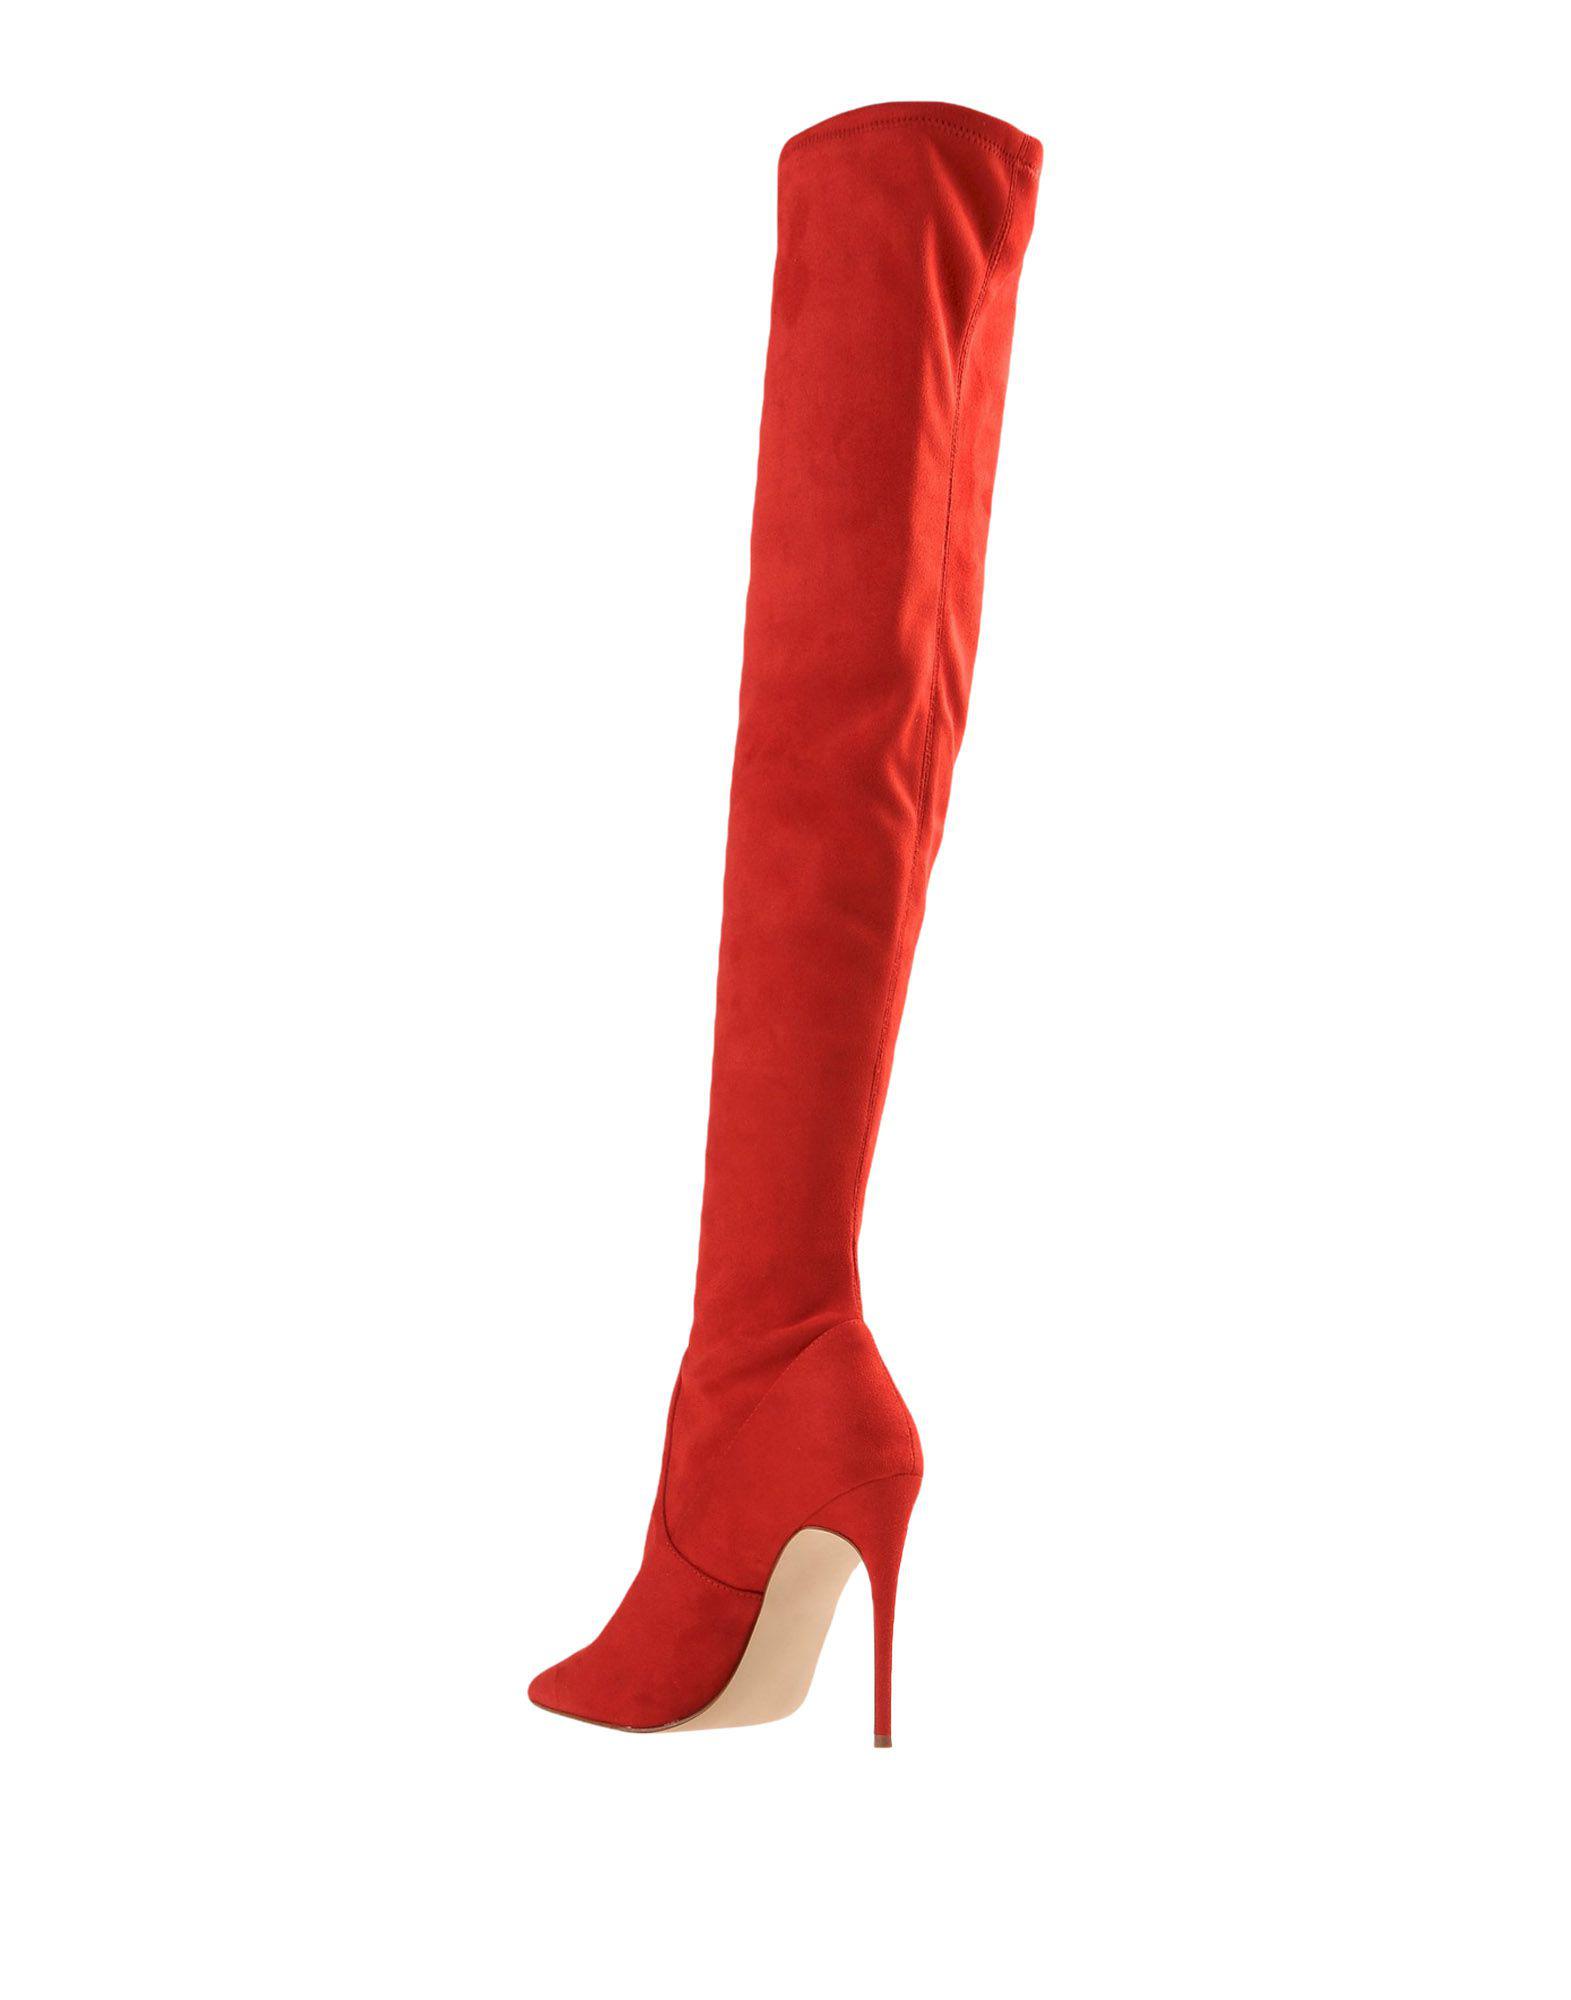 steve madden red boots